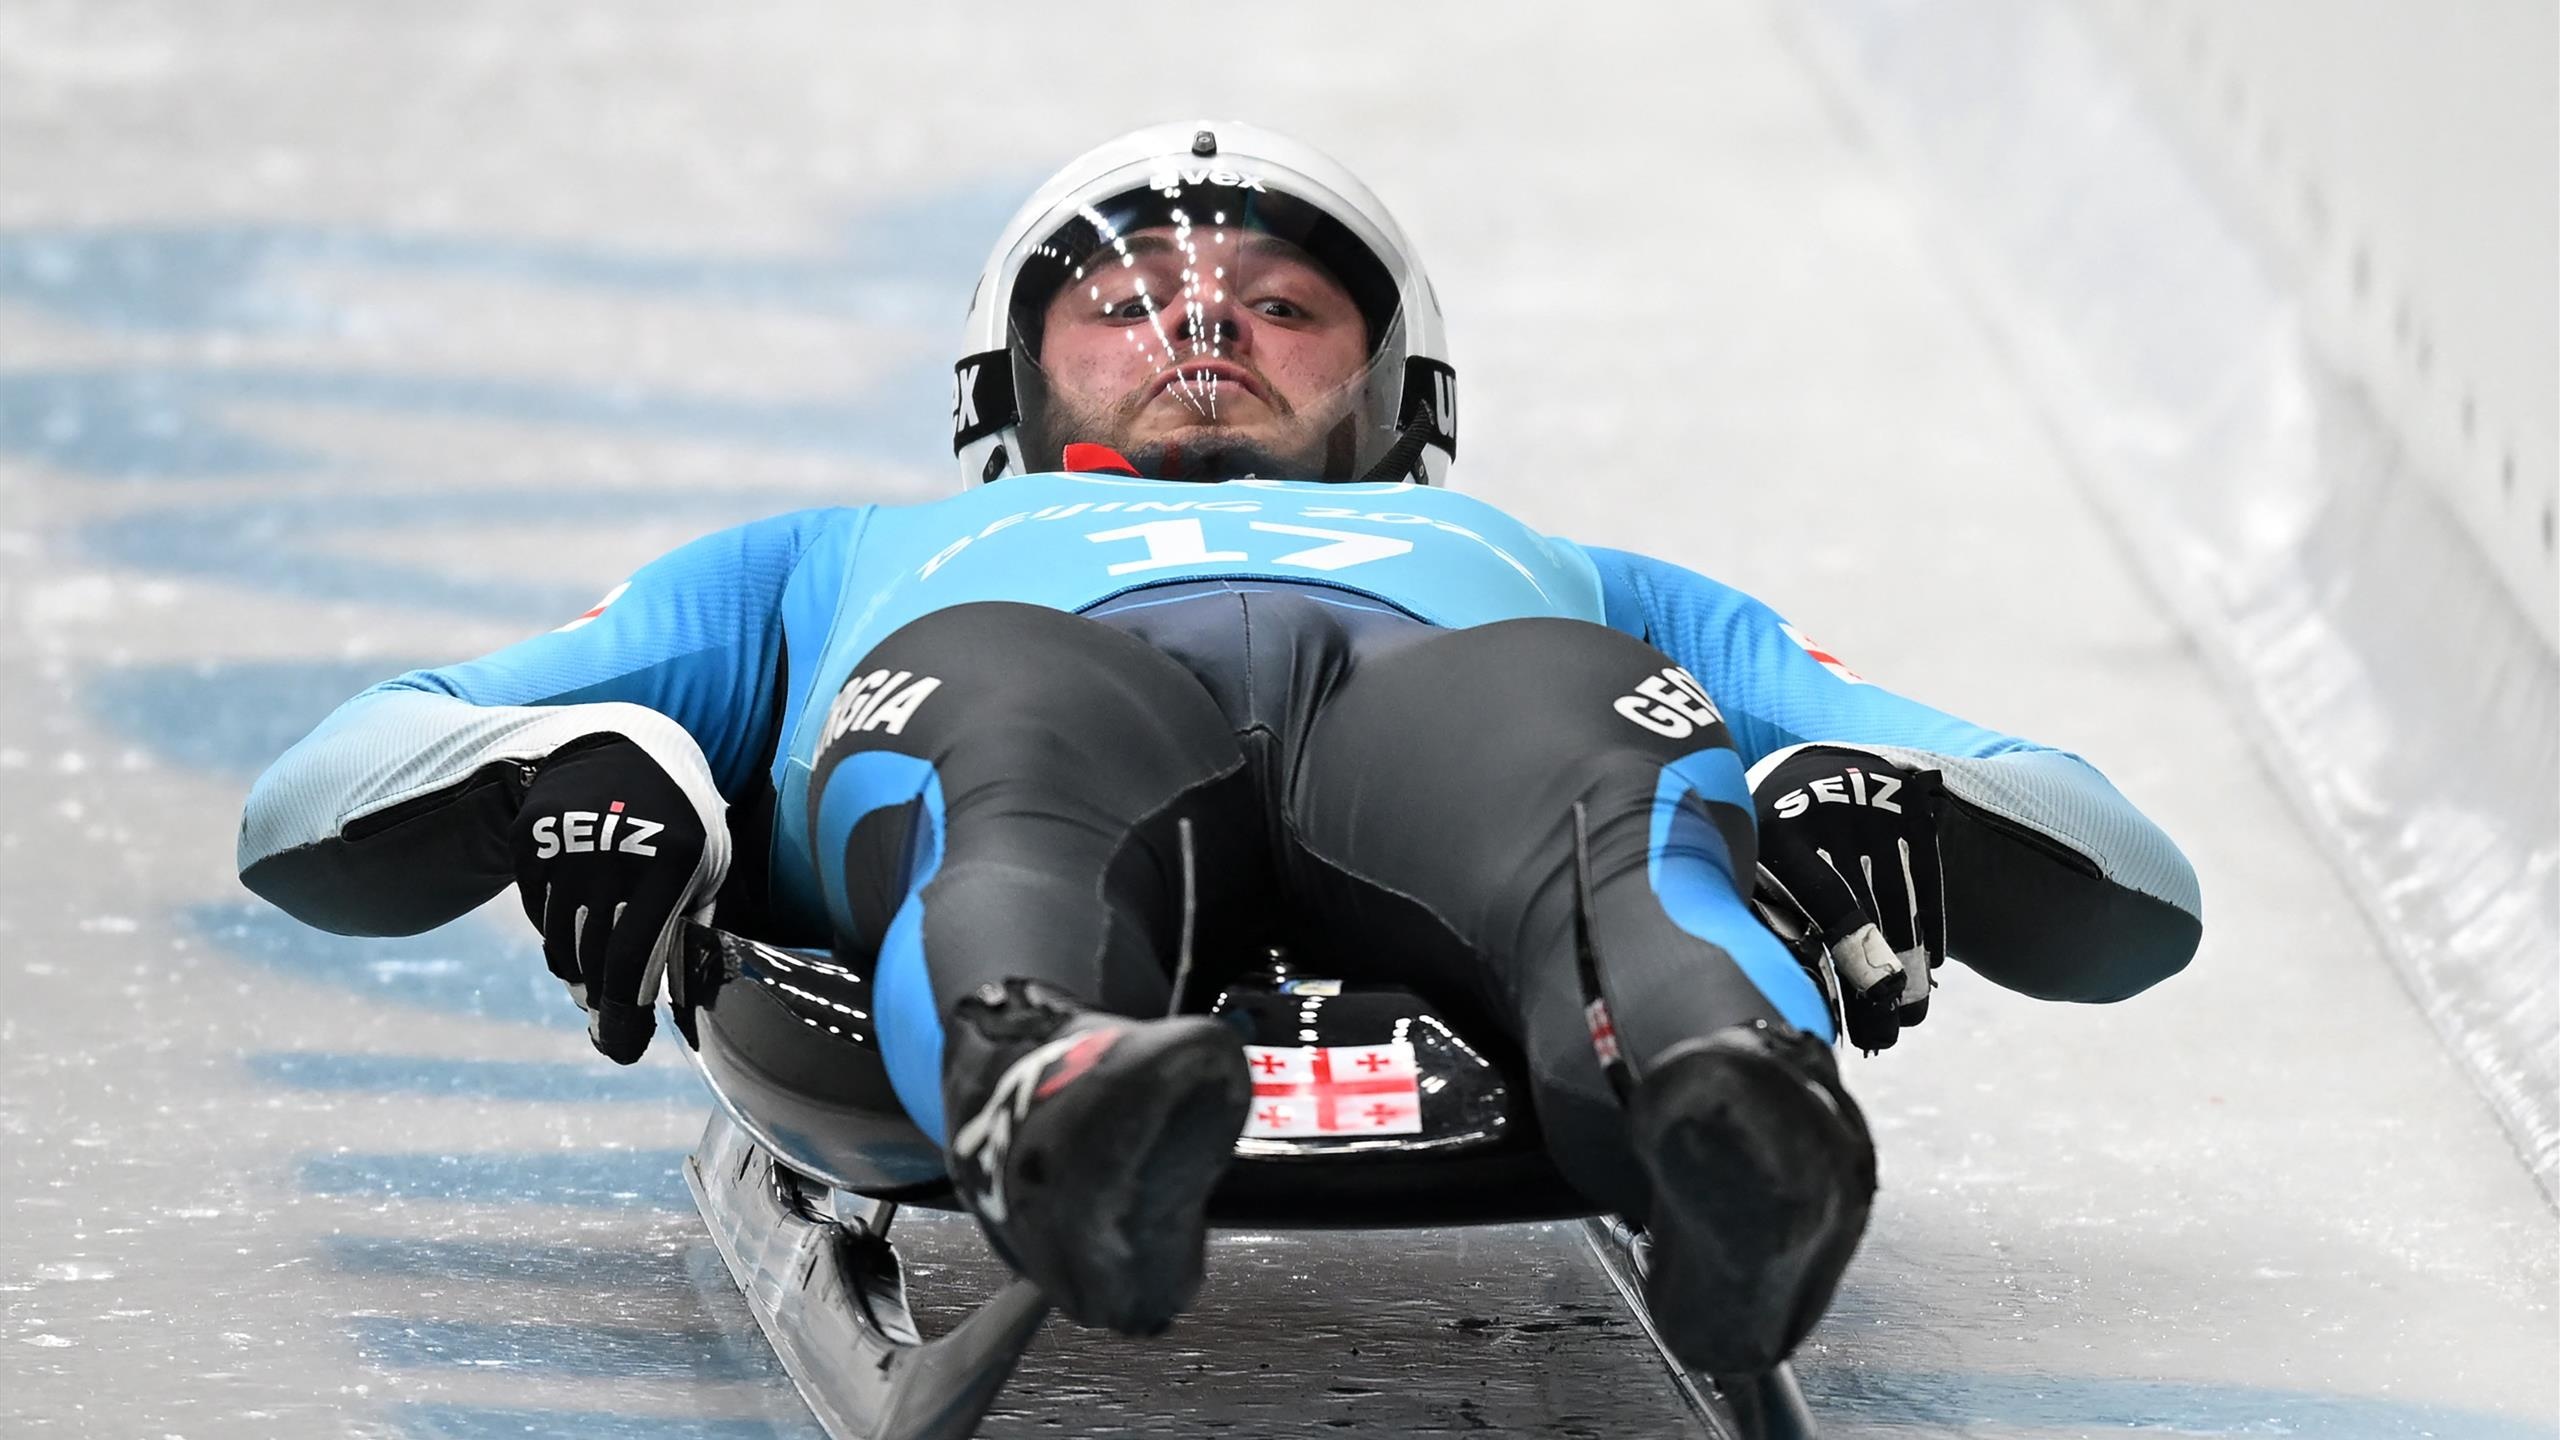 Sledding: Luge, Winter Olympics 2022, Sliding on an Icy Track. 2560x1440 HD Wallpaper.